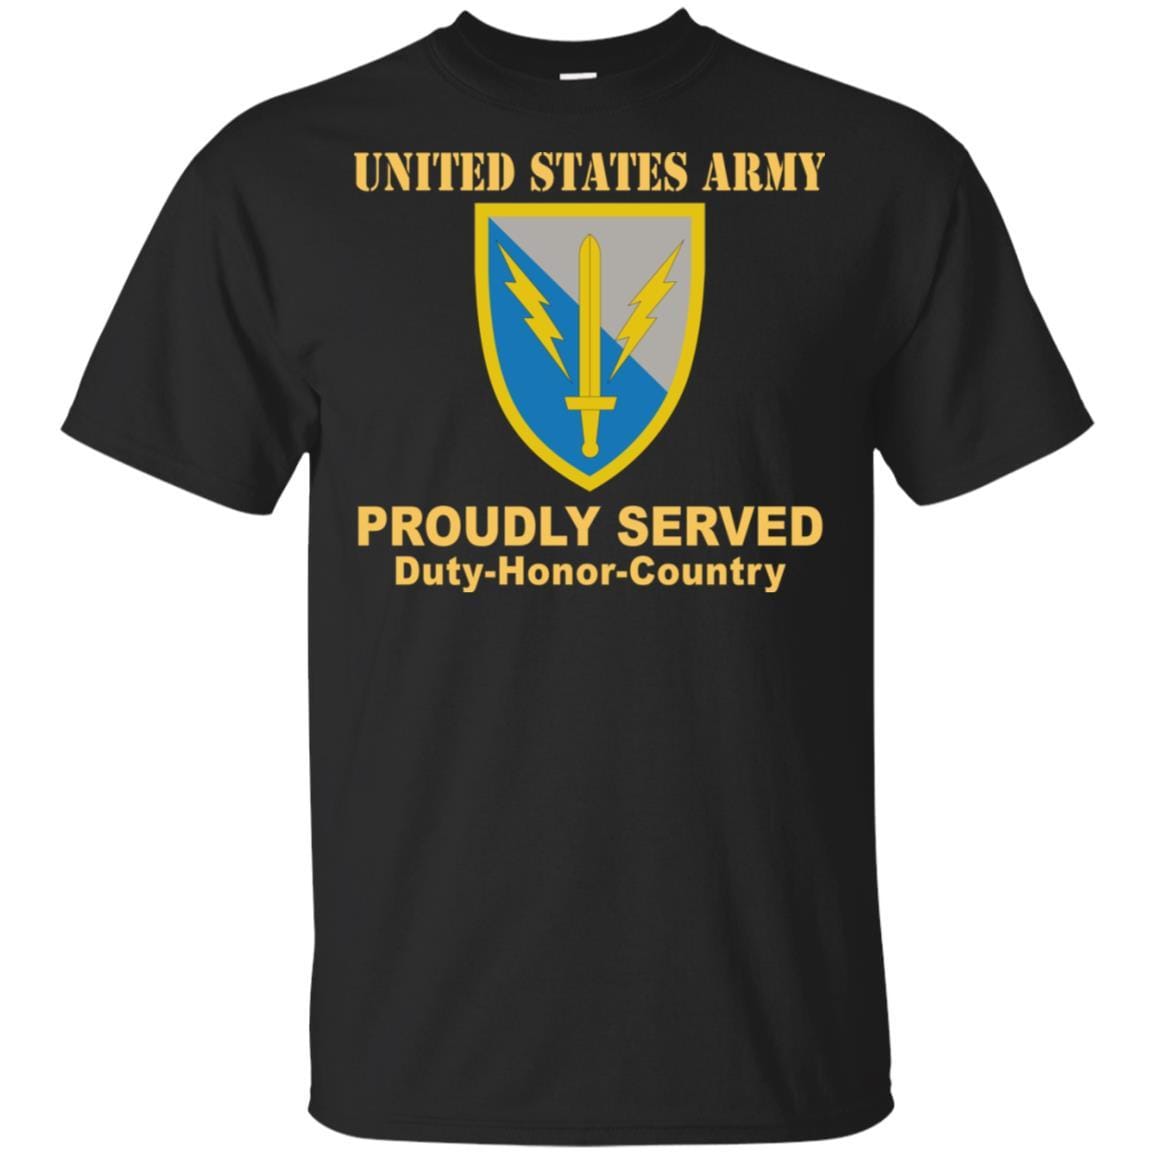 US ARMY 201 BATTLEFIELD SURVEILLANCE- Proudly Served T-Shirt On Front For Men-TShirt-Army-Veterans Nation